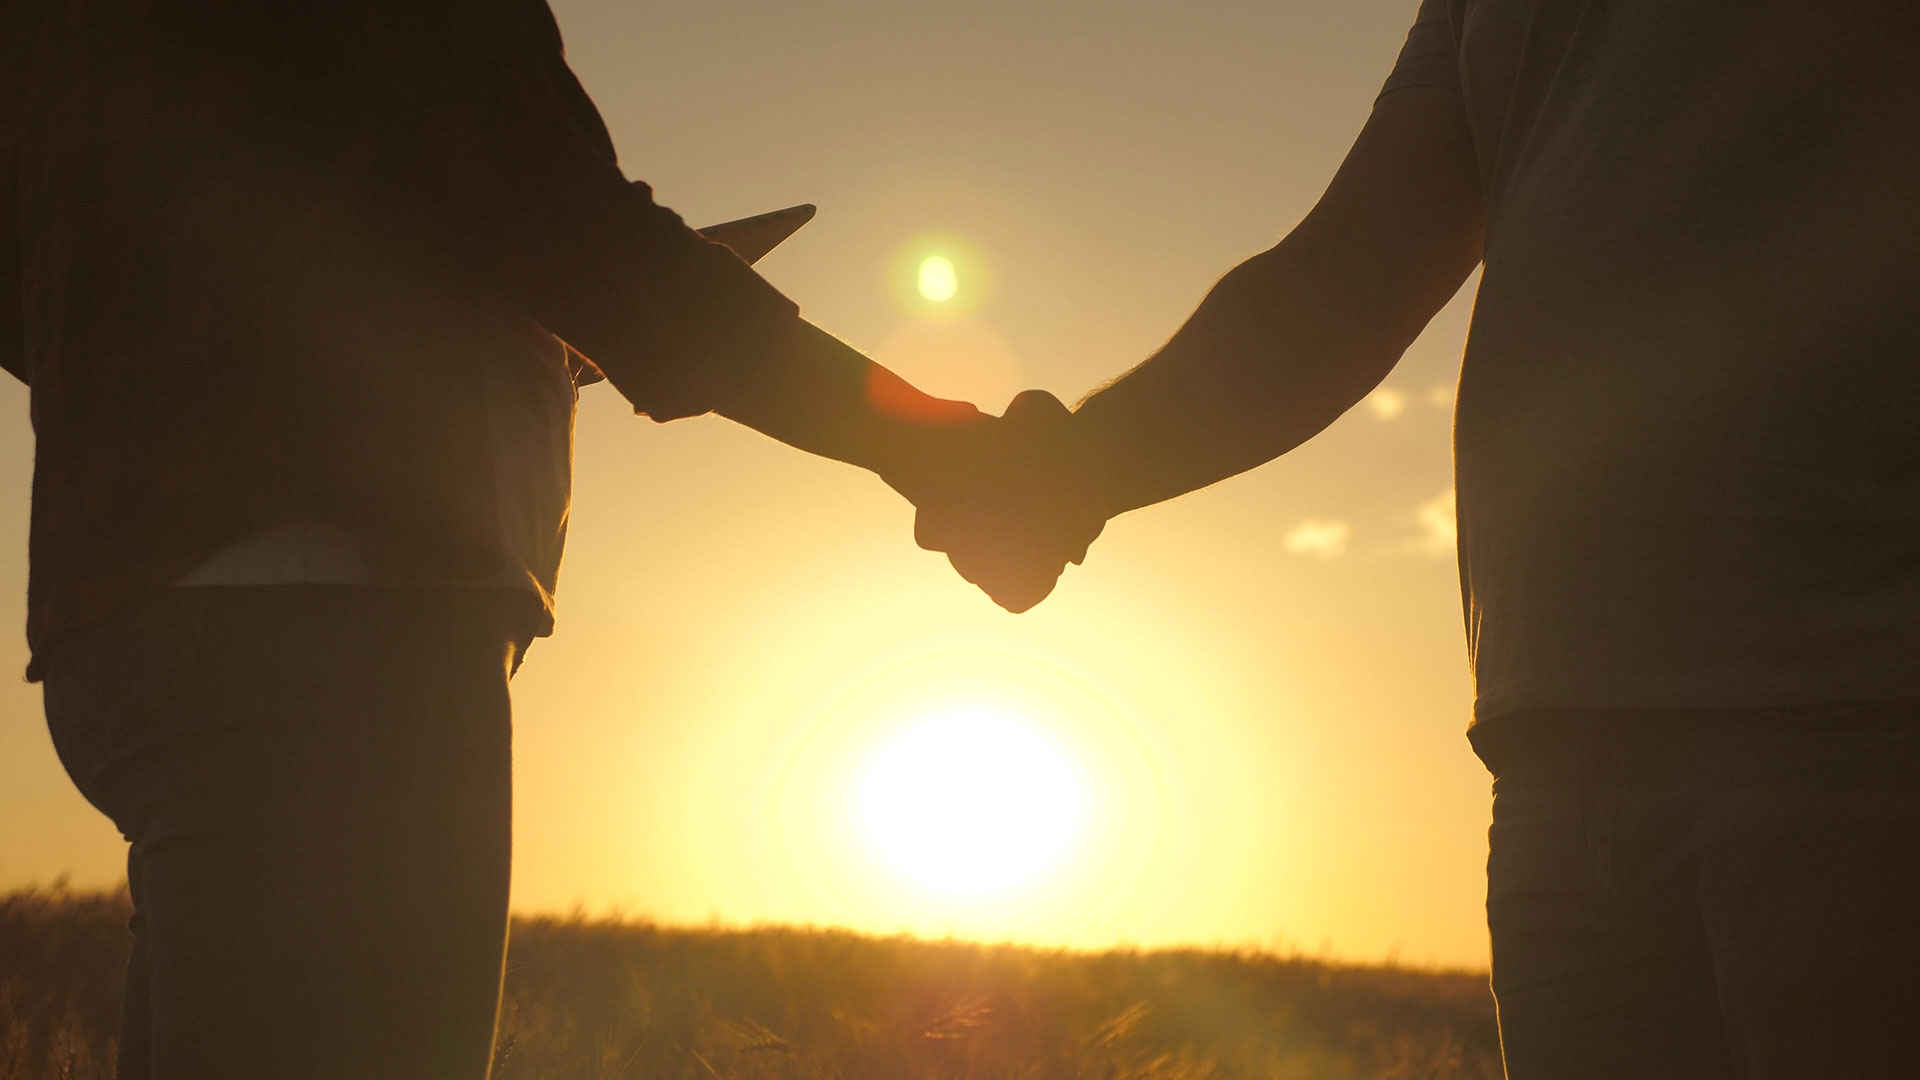 Silhouette of two people shaking hands with the sun setting behind